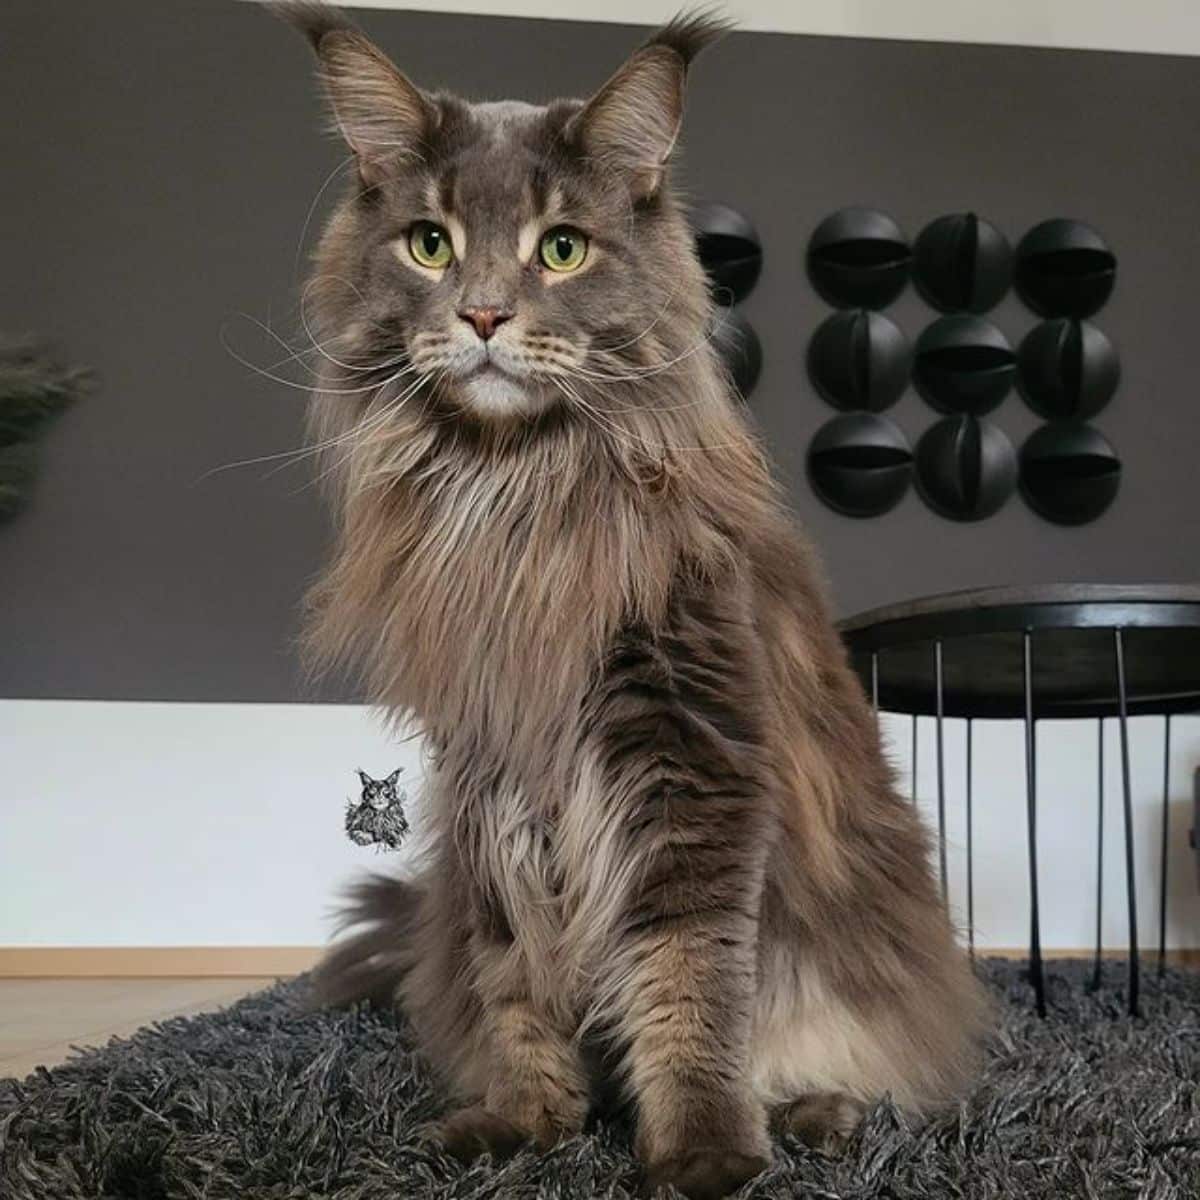 A fluffy brown maine coon sitting on a gray rug.